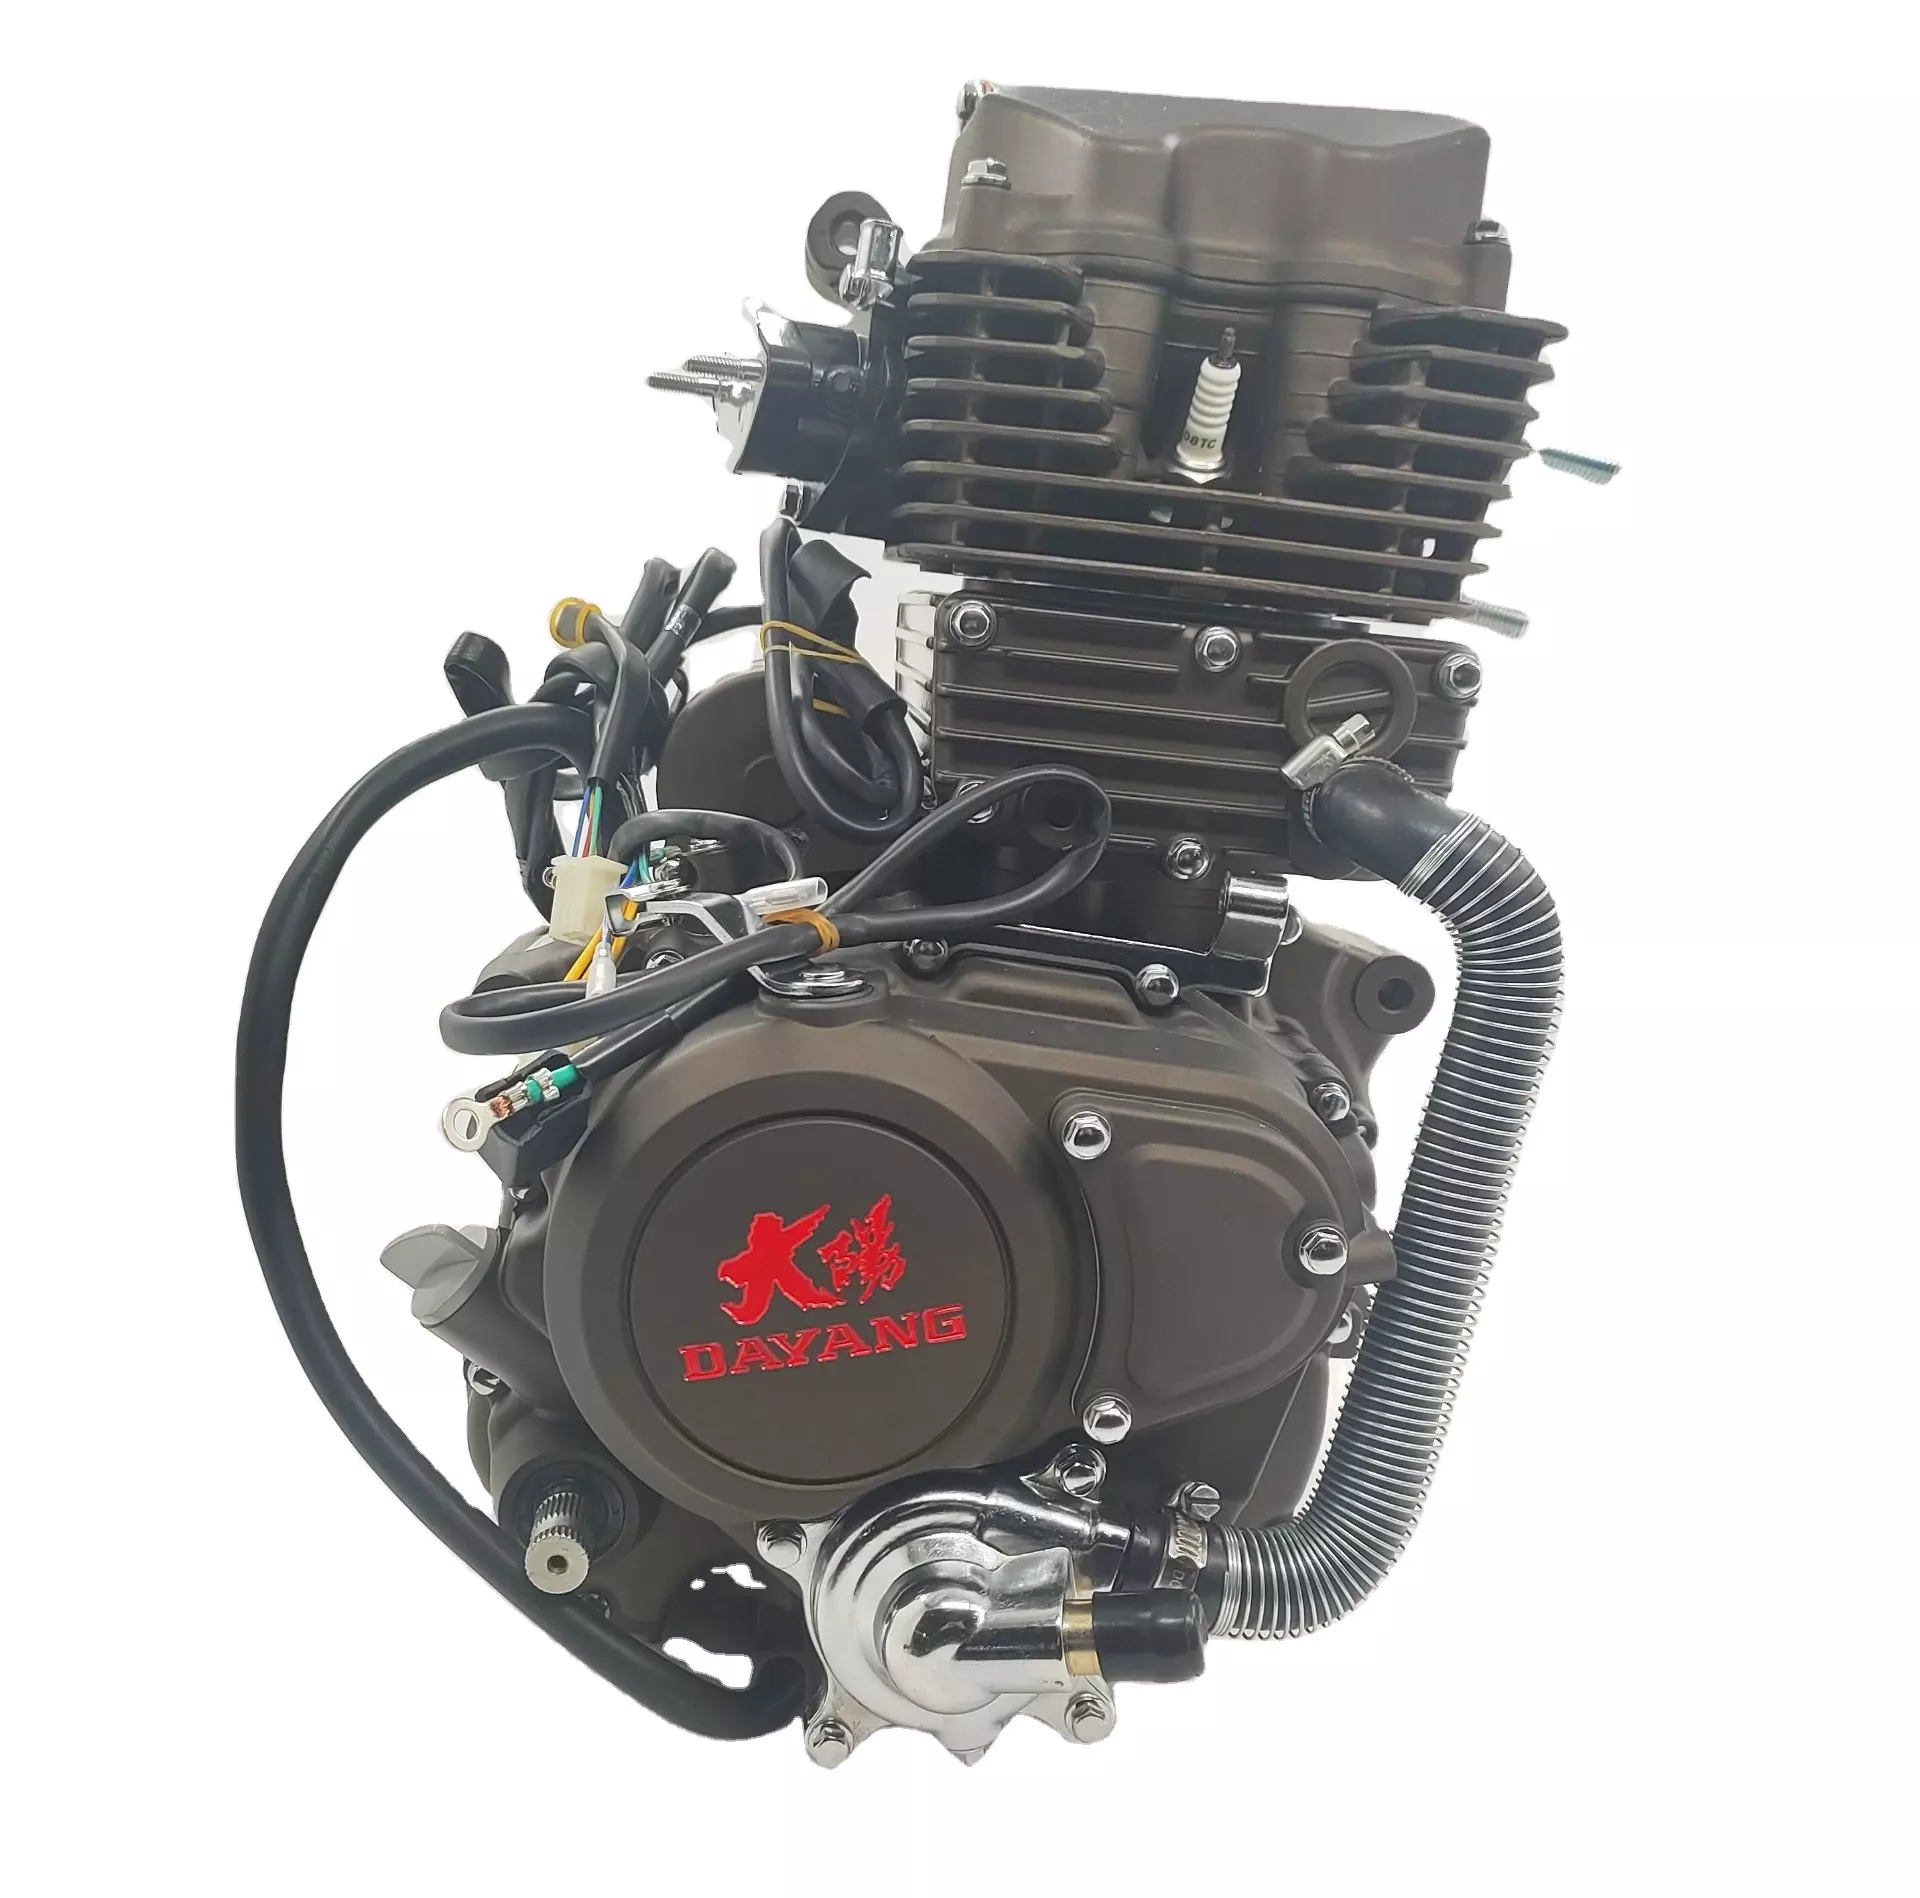 CG175cc Cool with the pump DAYANG LIFAN Motorcycle Engine Assembly Single Cylinder Four Stroke Style China CCC Origin Type